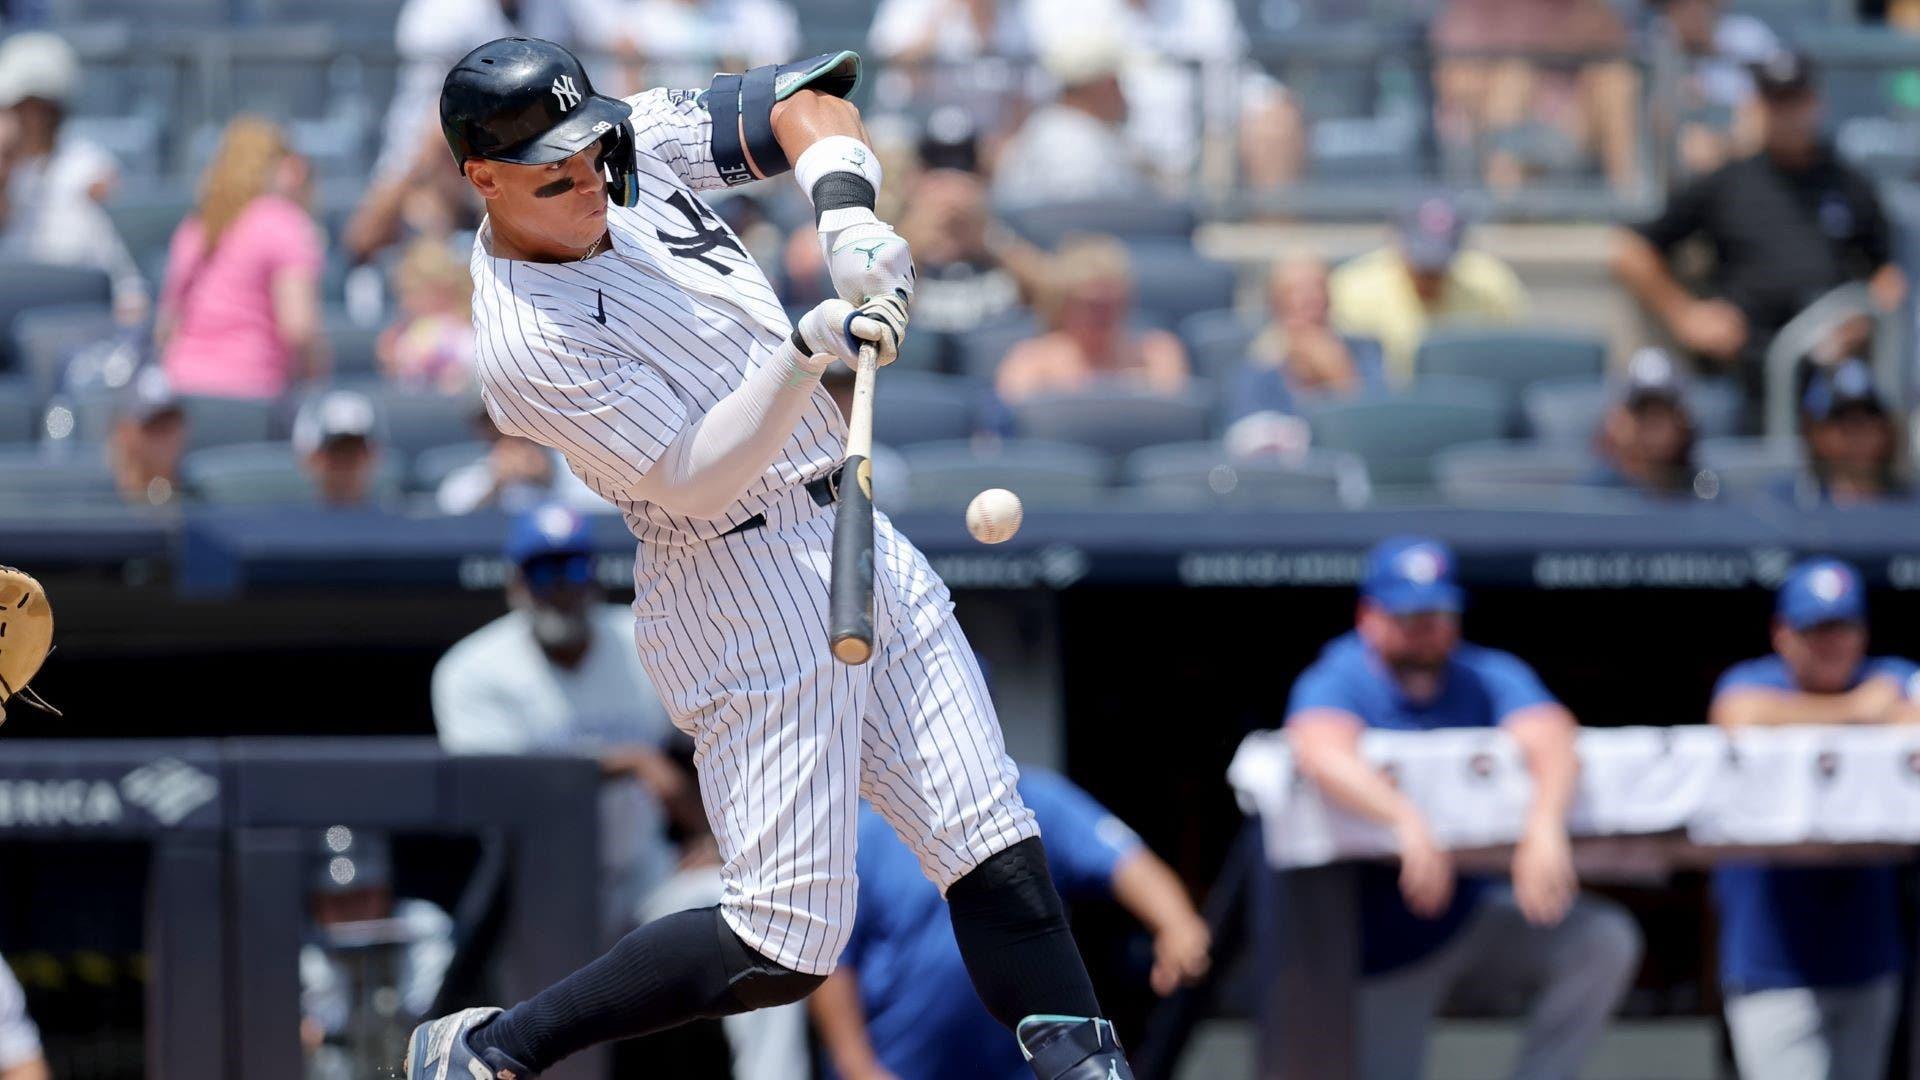 Yankees hit three home runs in 8-3 win over Blue Jays